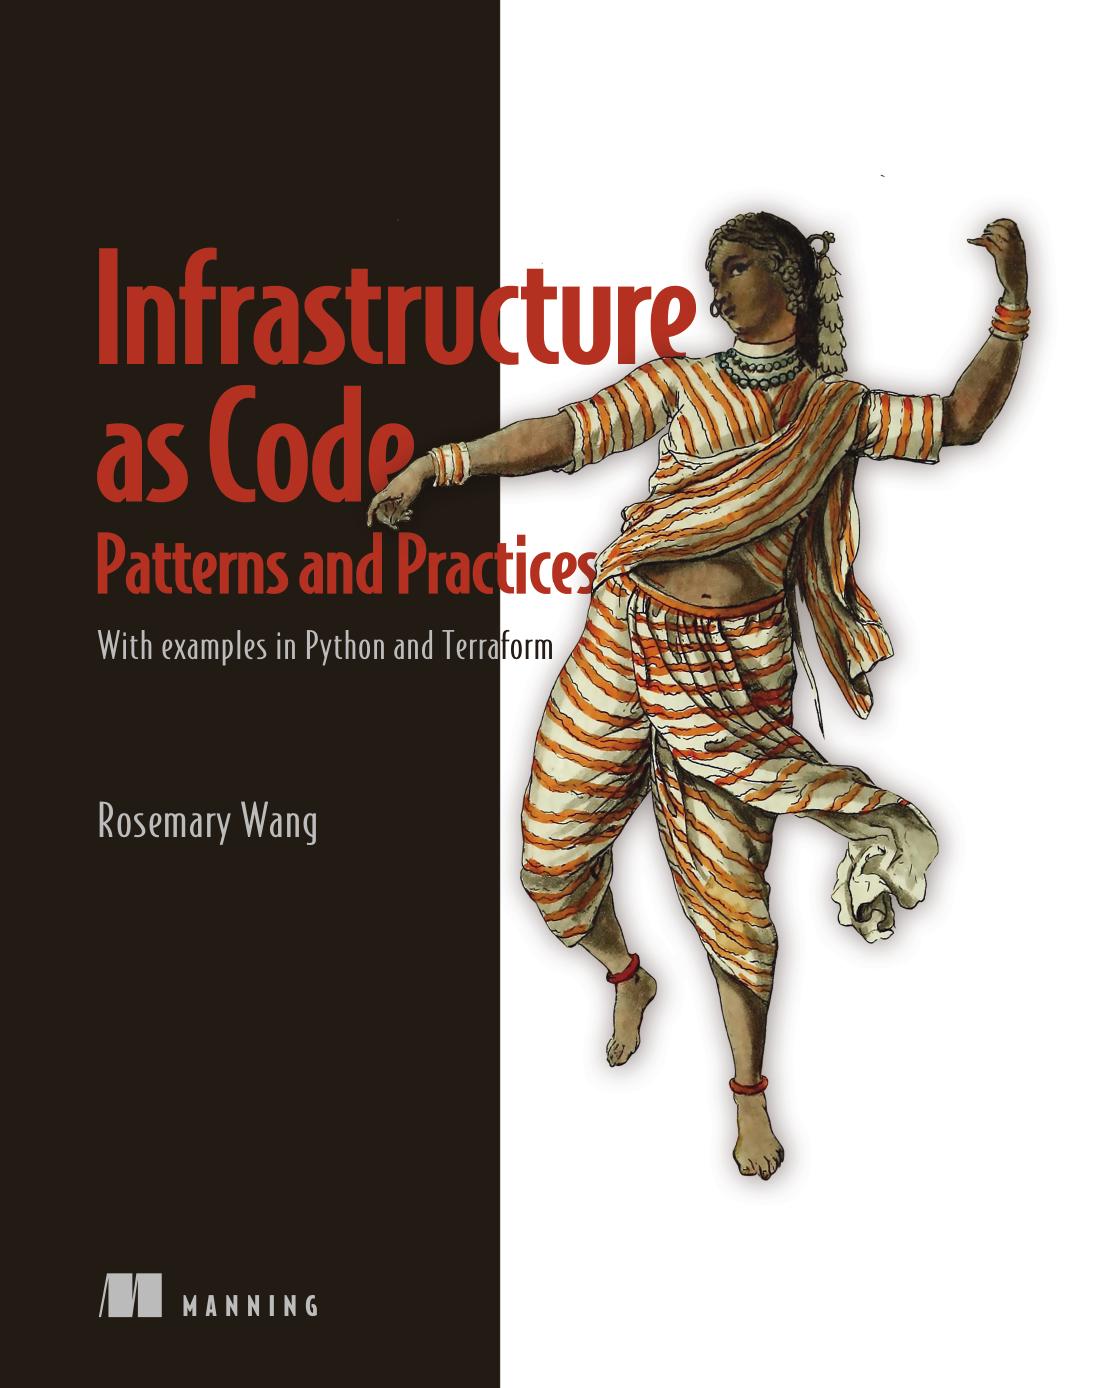 Infrastructure as Code, Patterns and Practices: With examples in Python and Terraform by Rosemary Wang